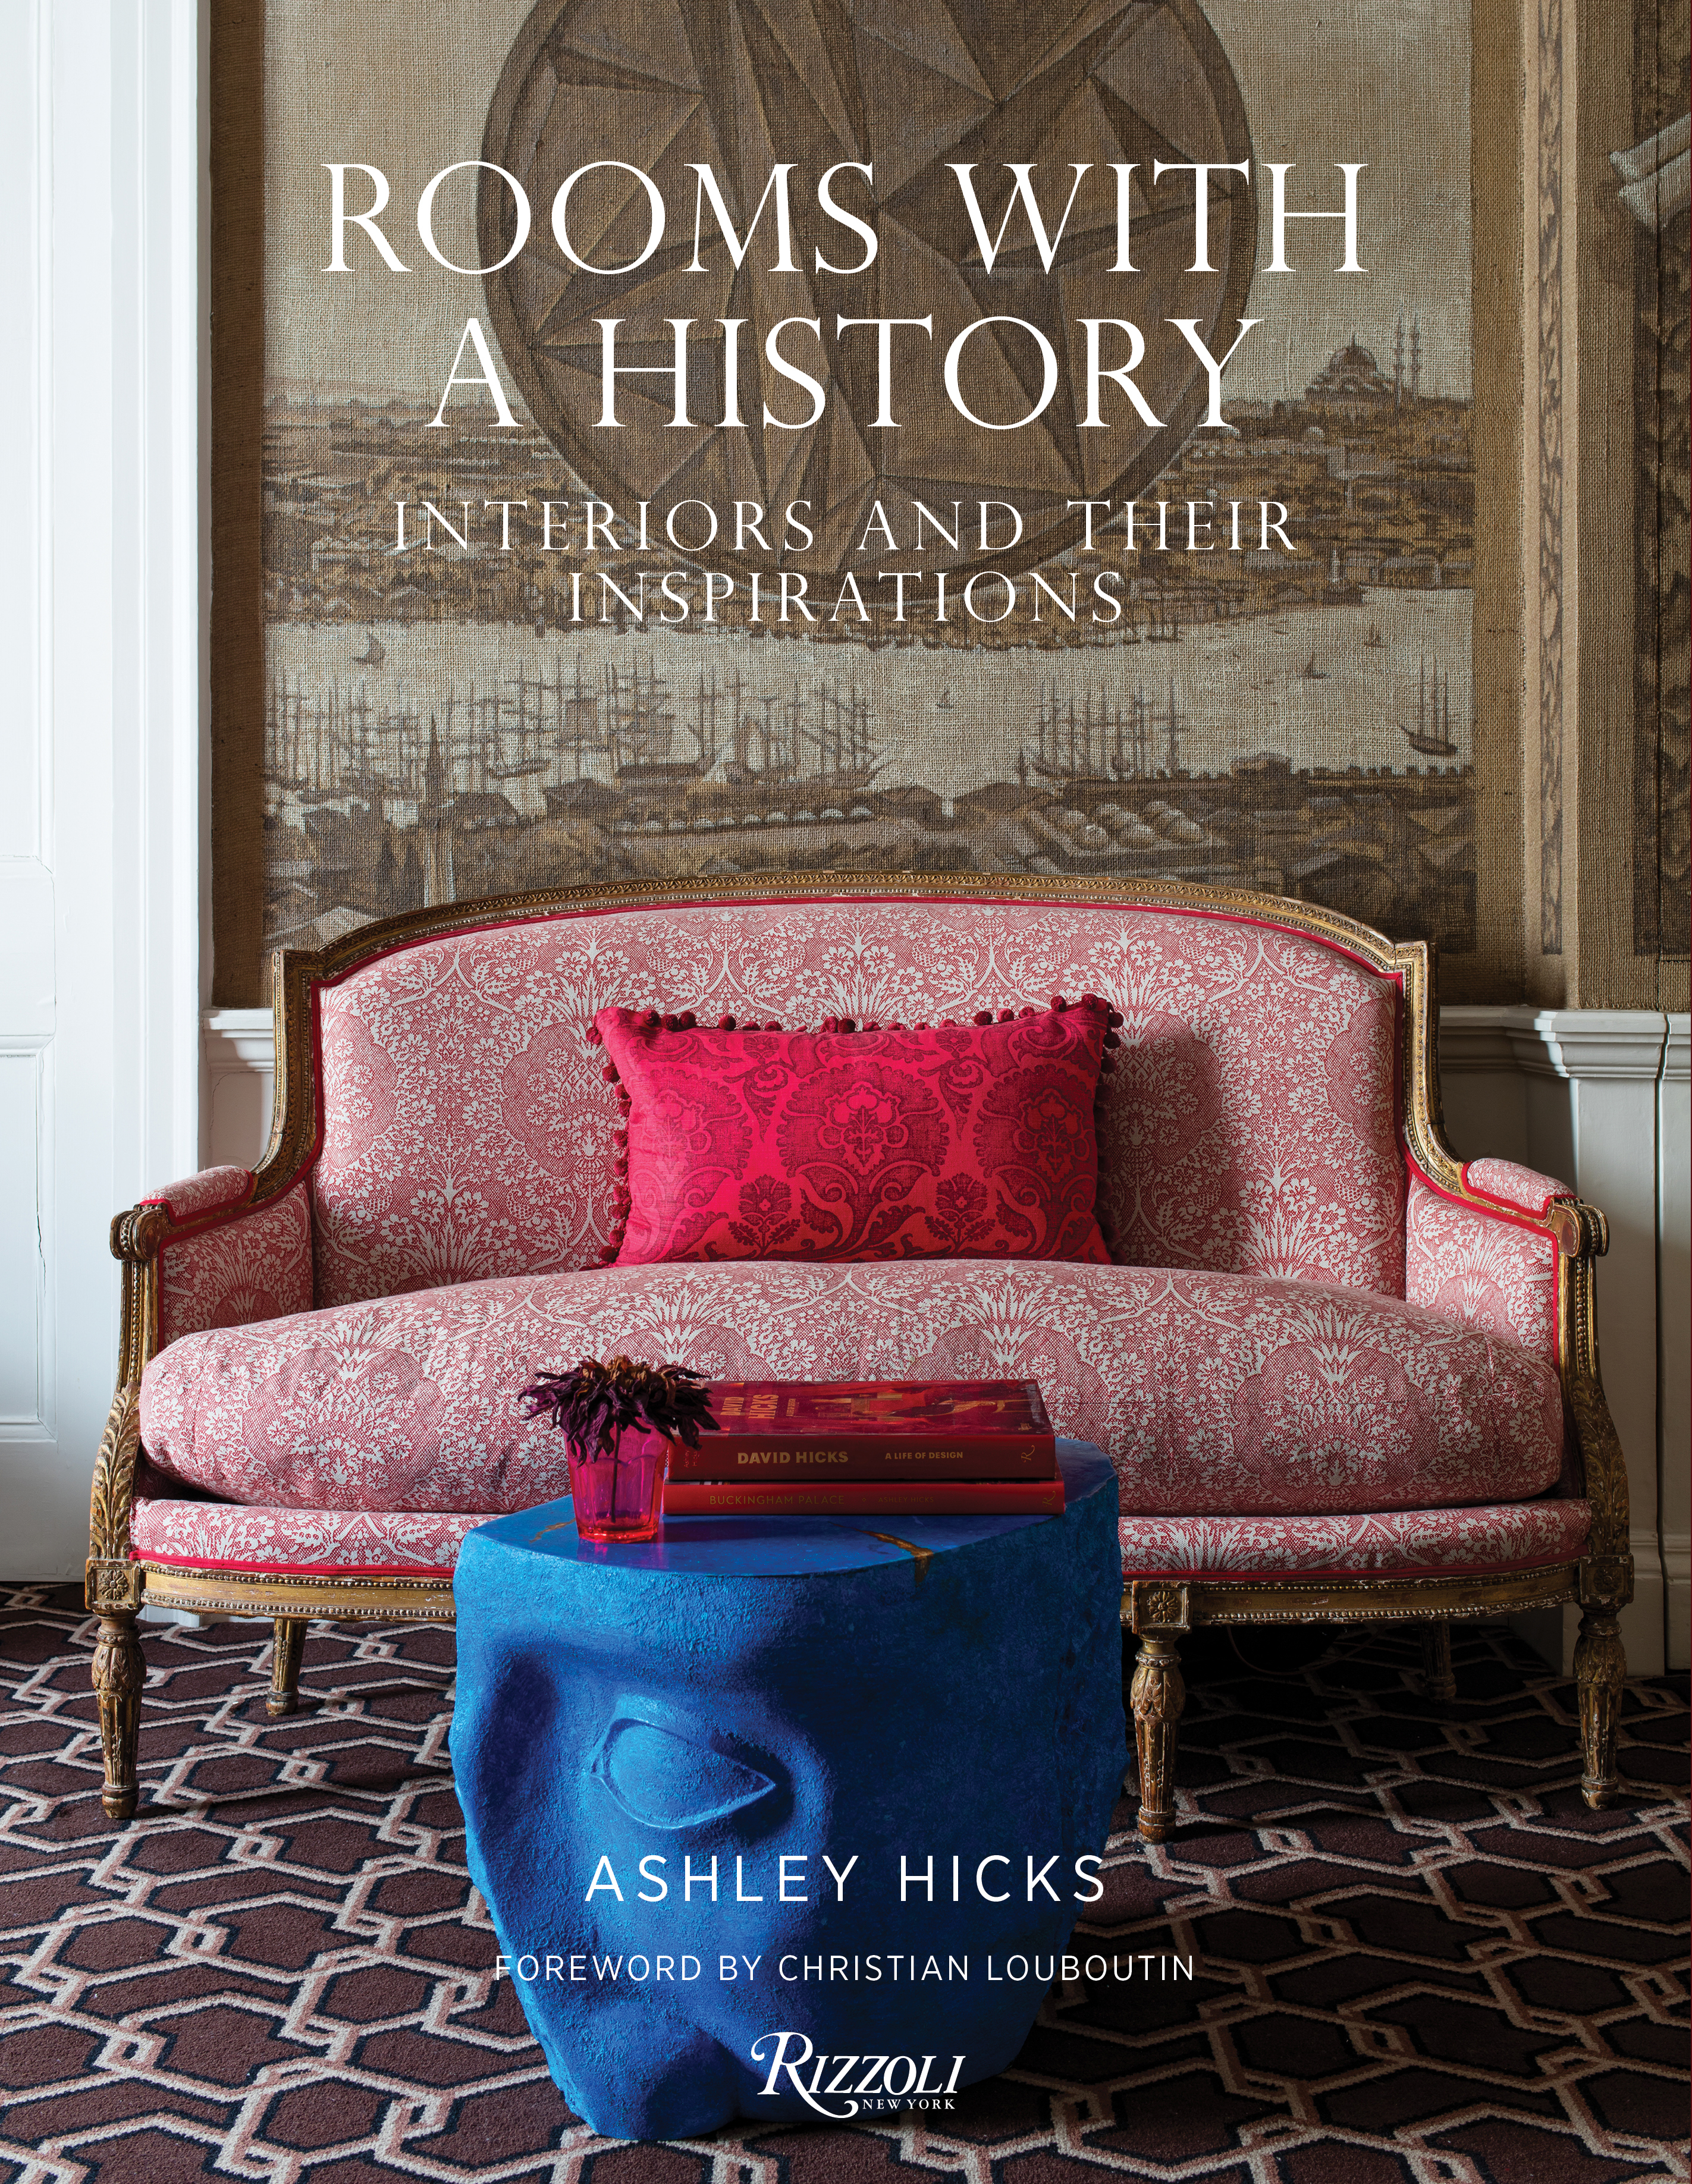 Interior designer Ashley Hicks has a new book out from Rizzoli, called 'Rooms with a History: Interiors and their Inspirations.'